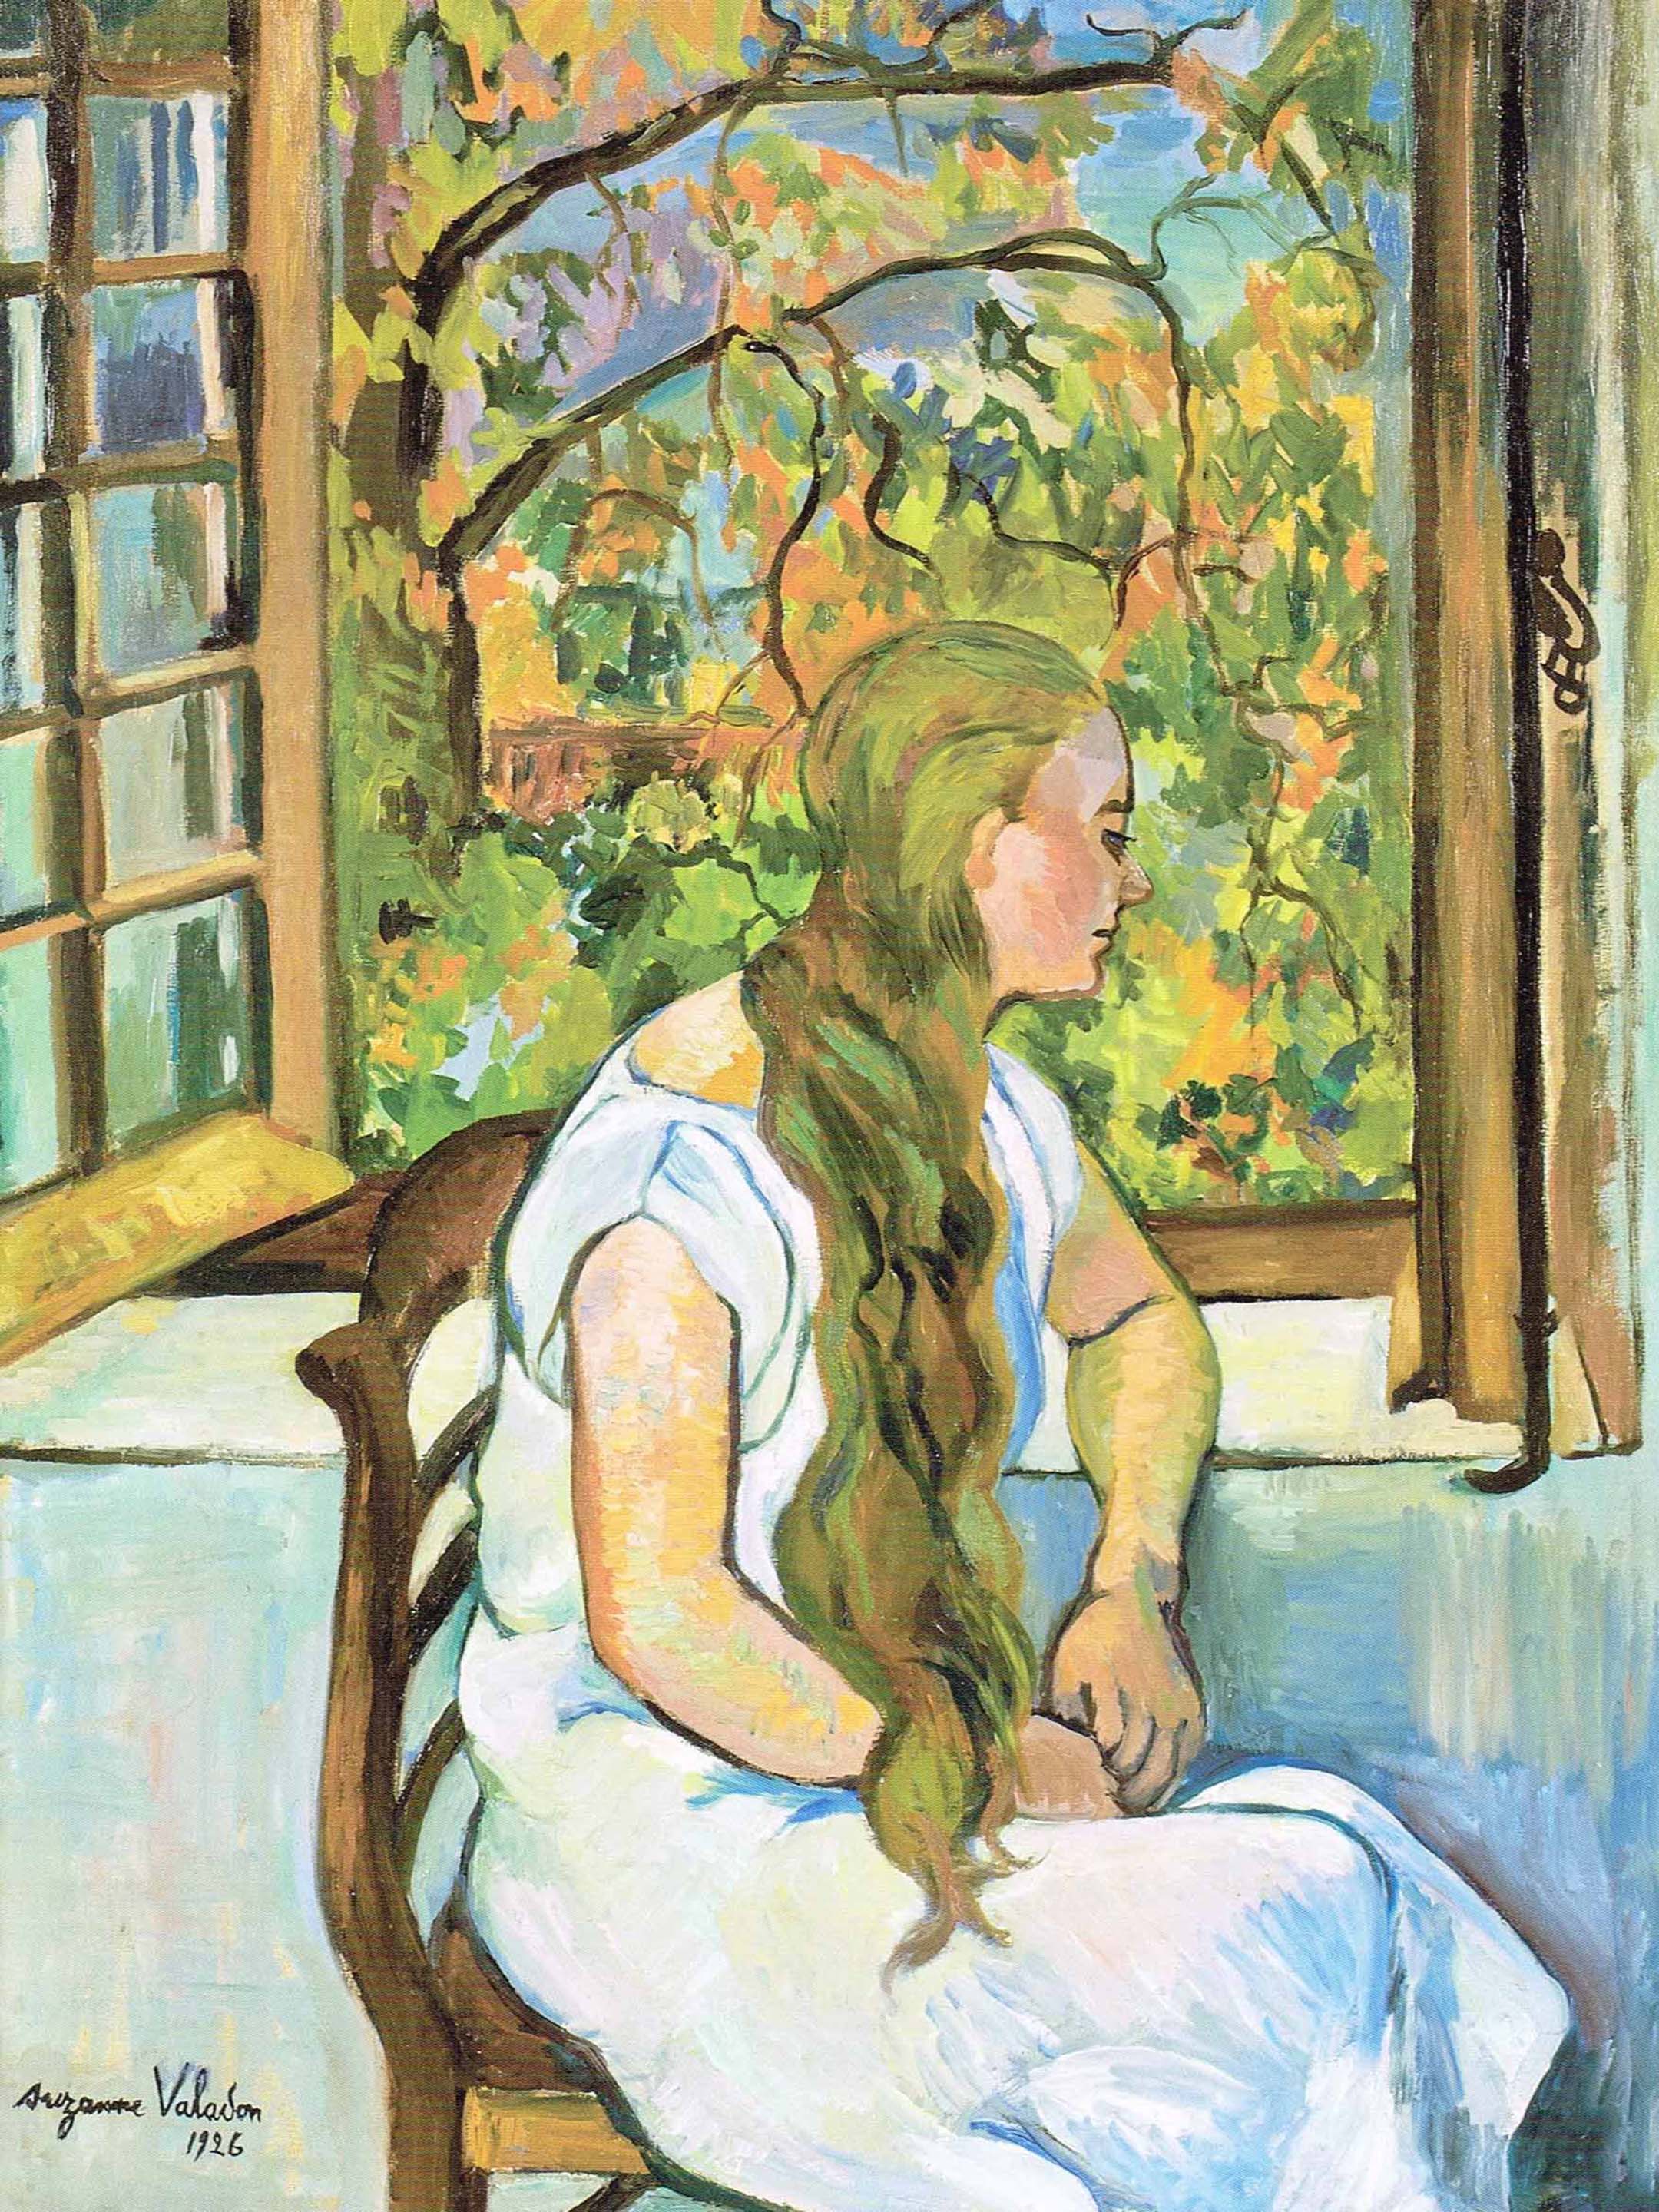 Valadon Suzanne - Germaine utter in front of her window